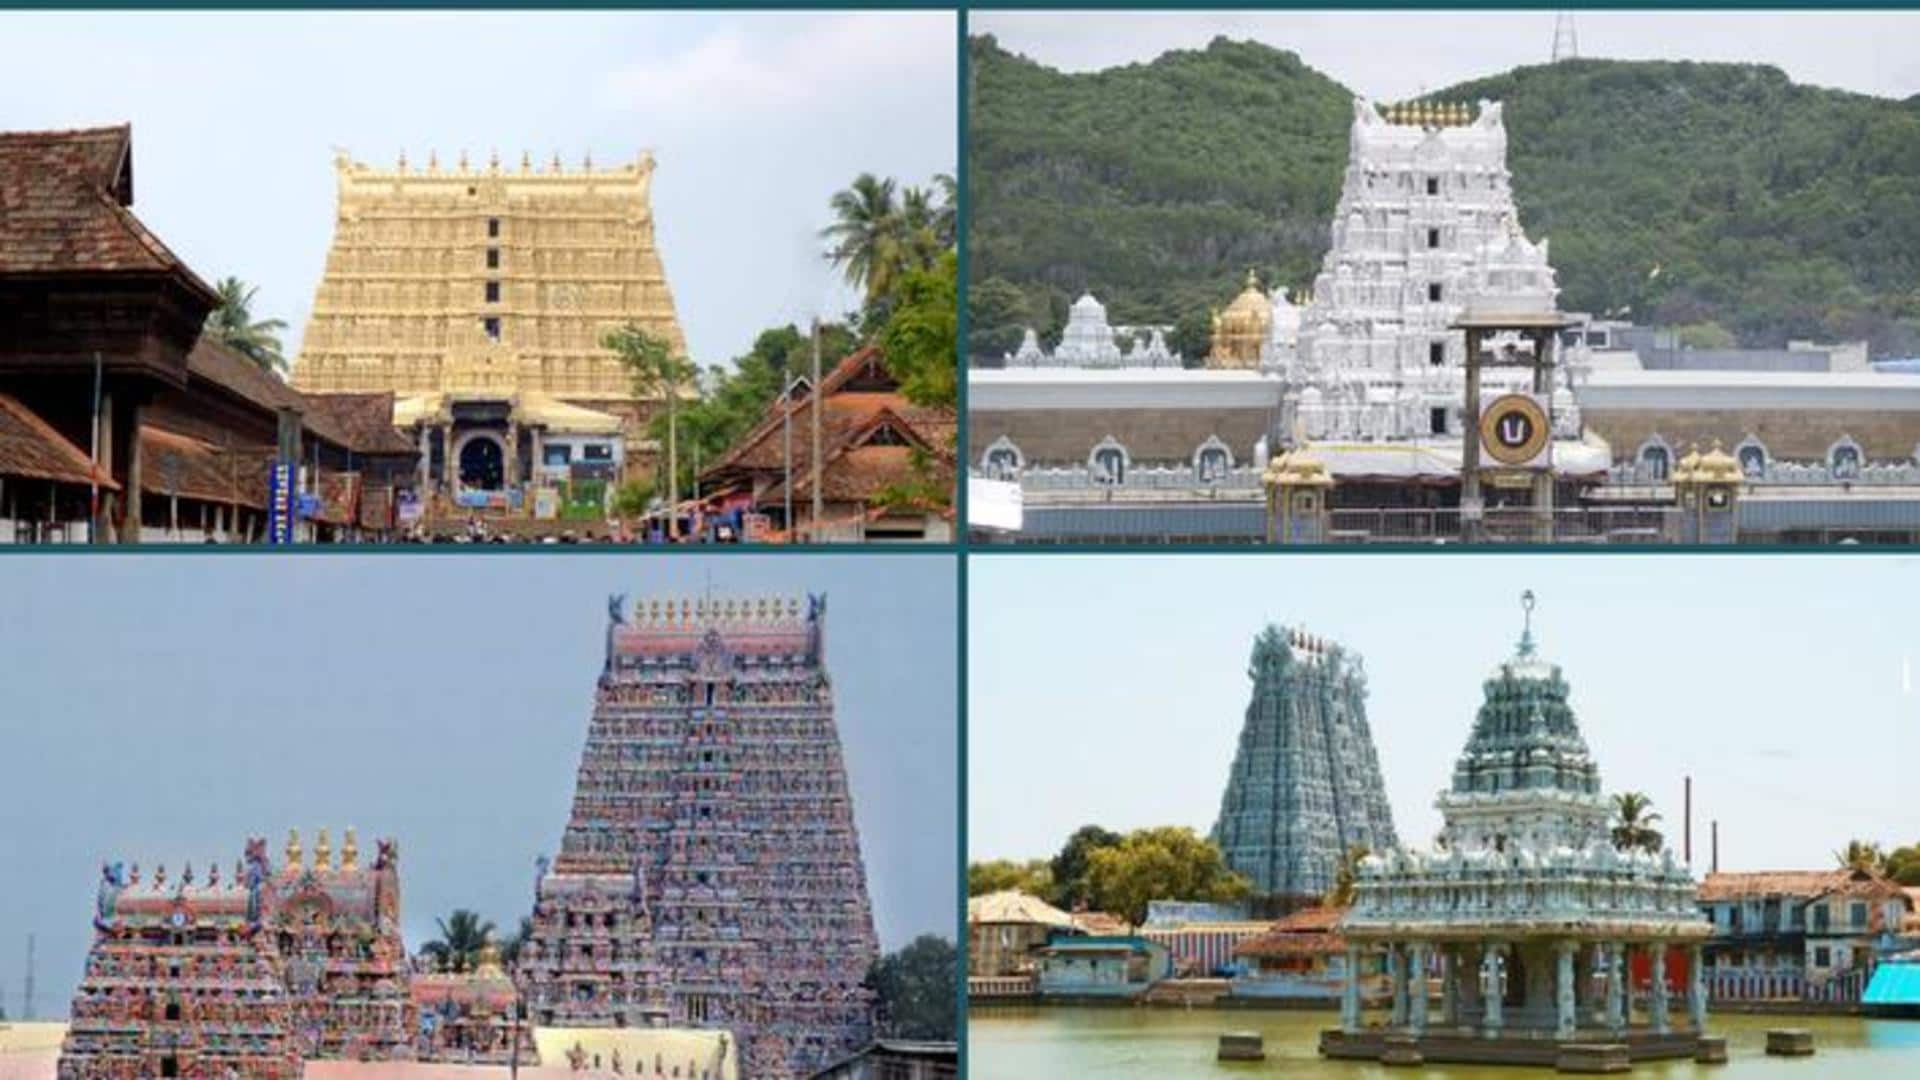 Traveling to South India? Visit these stunning temples